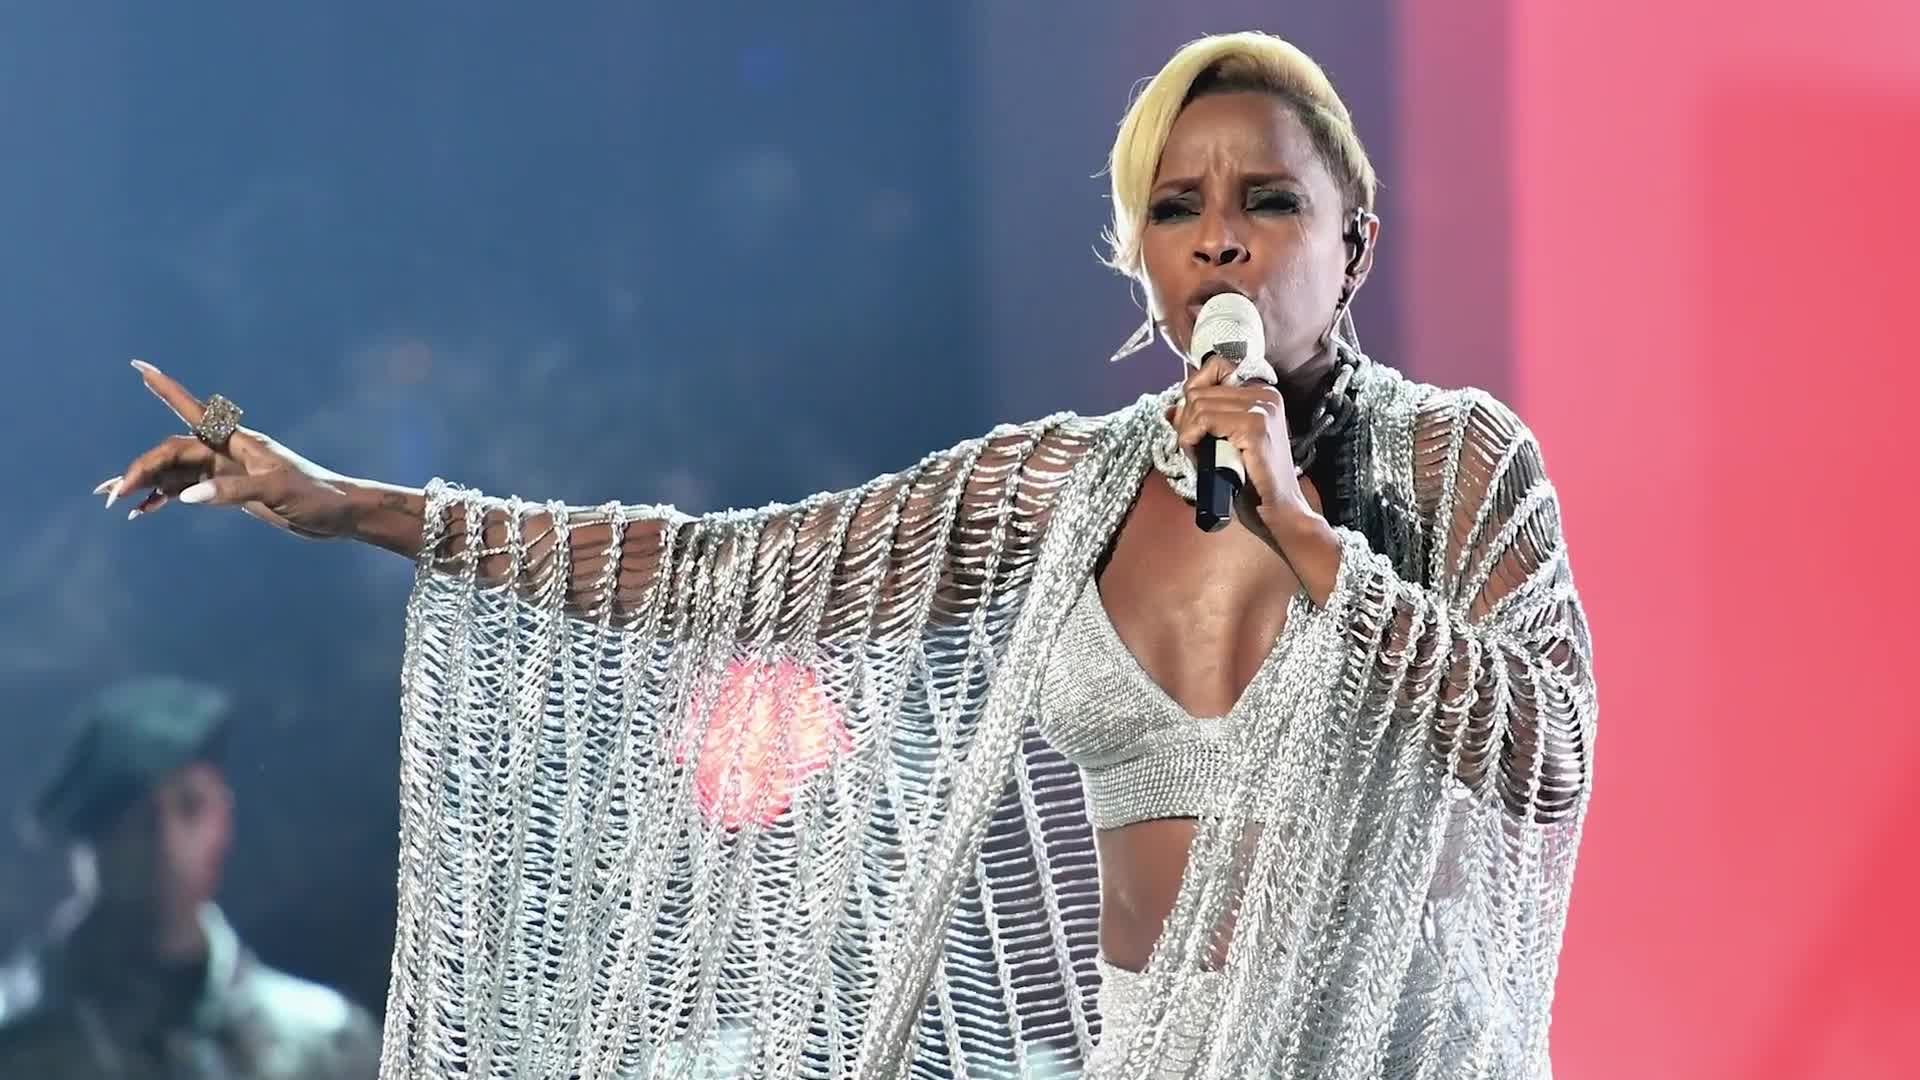 Watch Mary J. Blige, the Queen of Hip-Hop Soul, Examines Her Life in Looks, Life in Looks